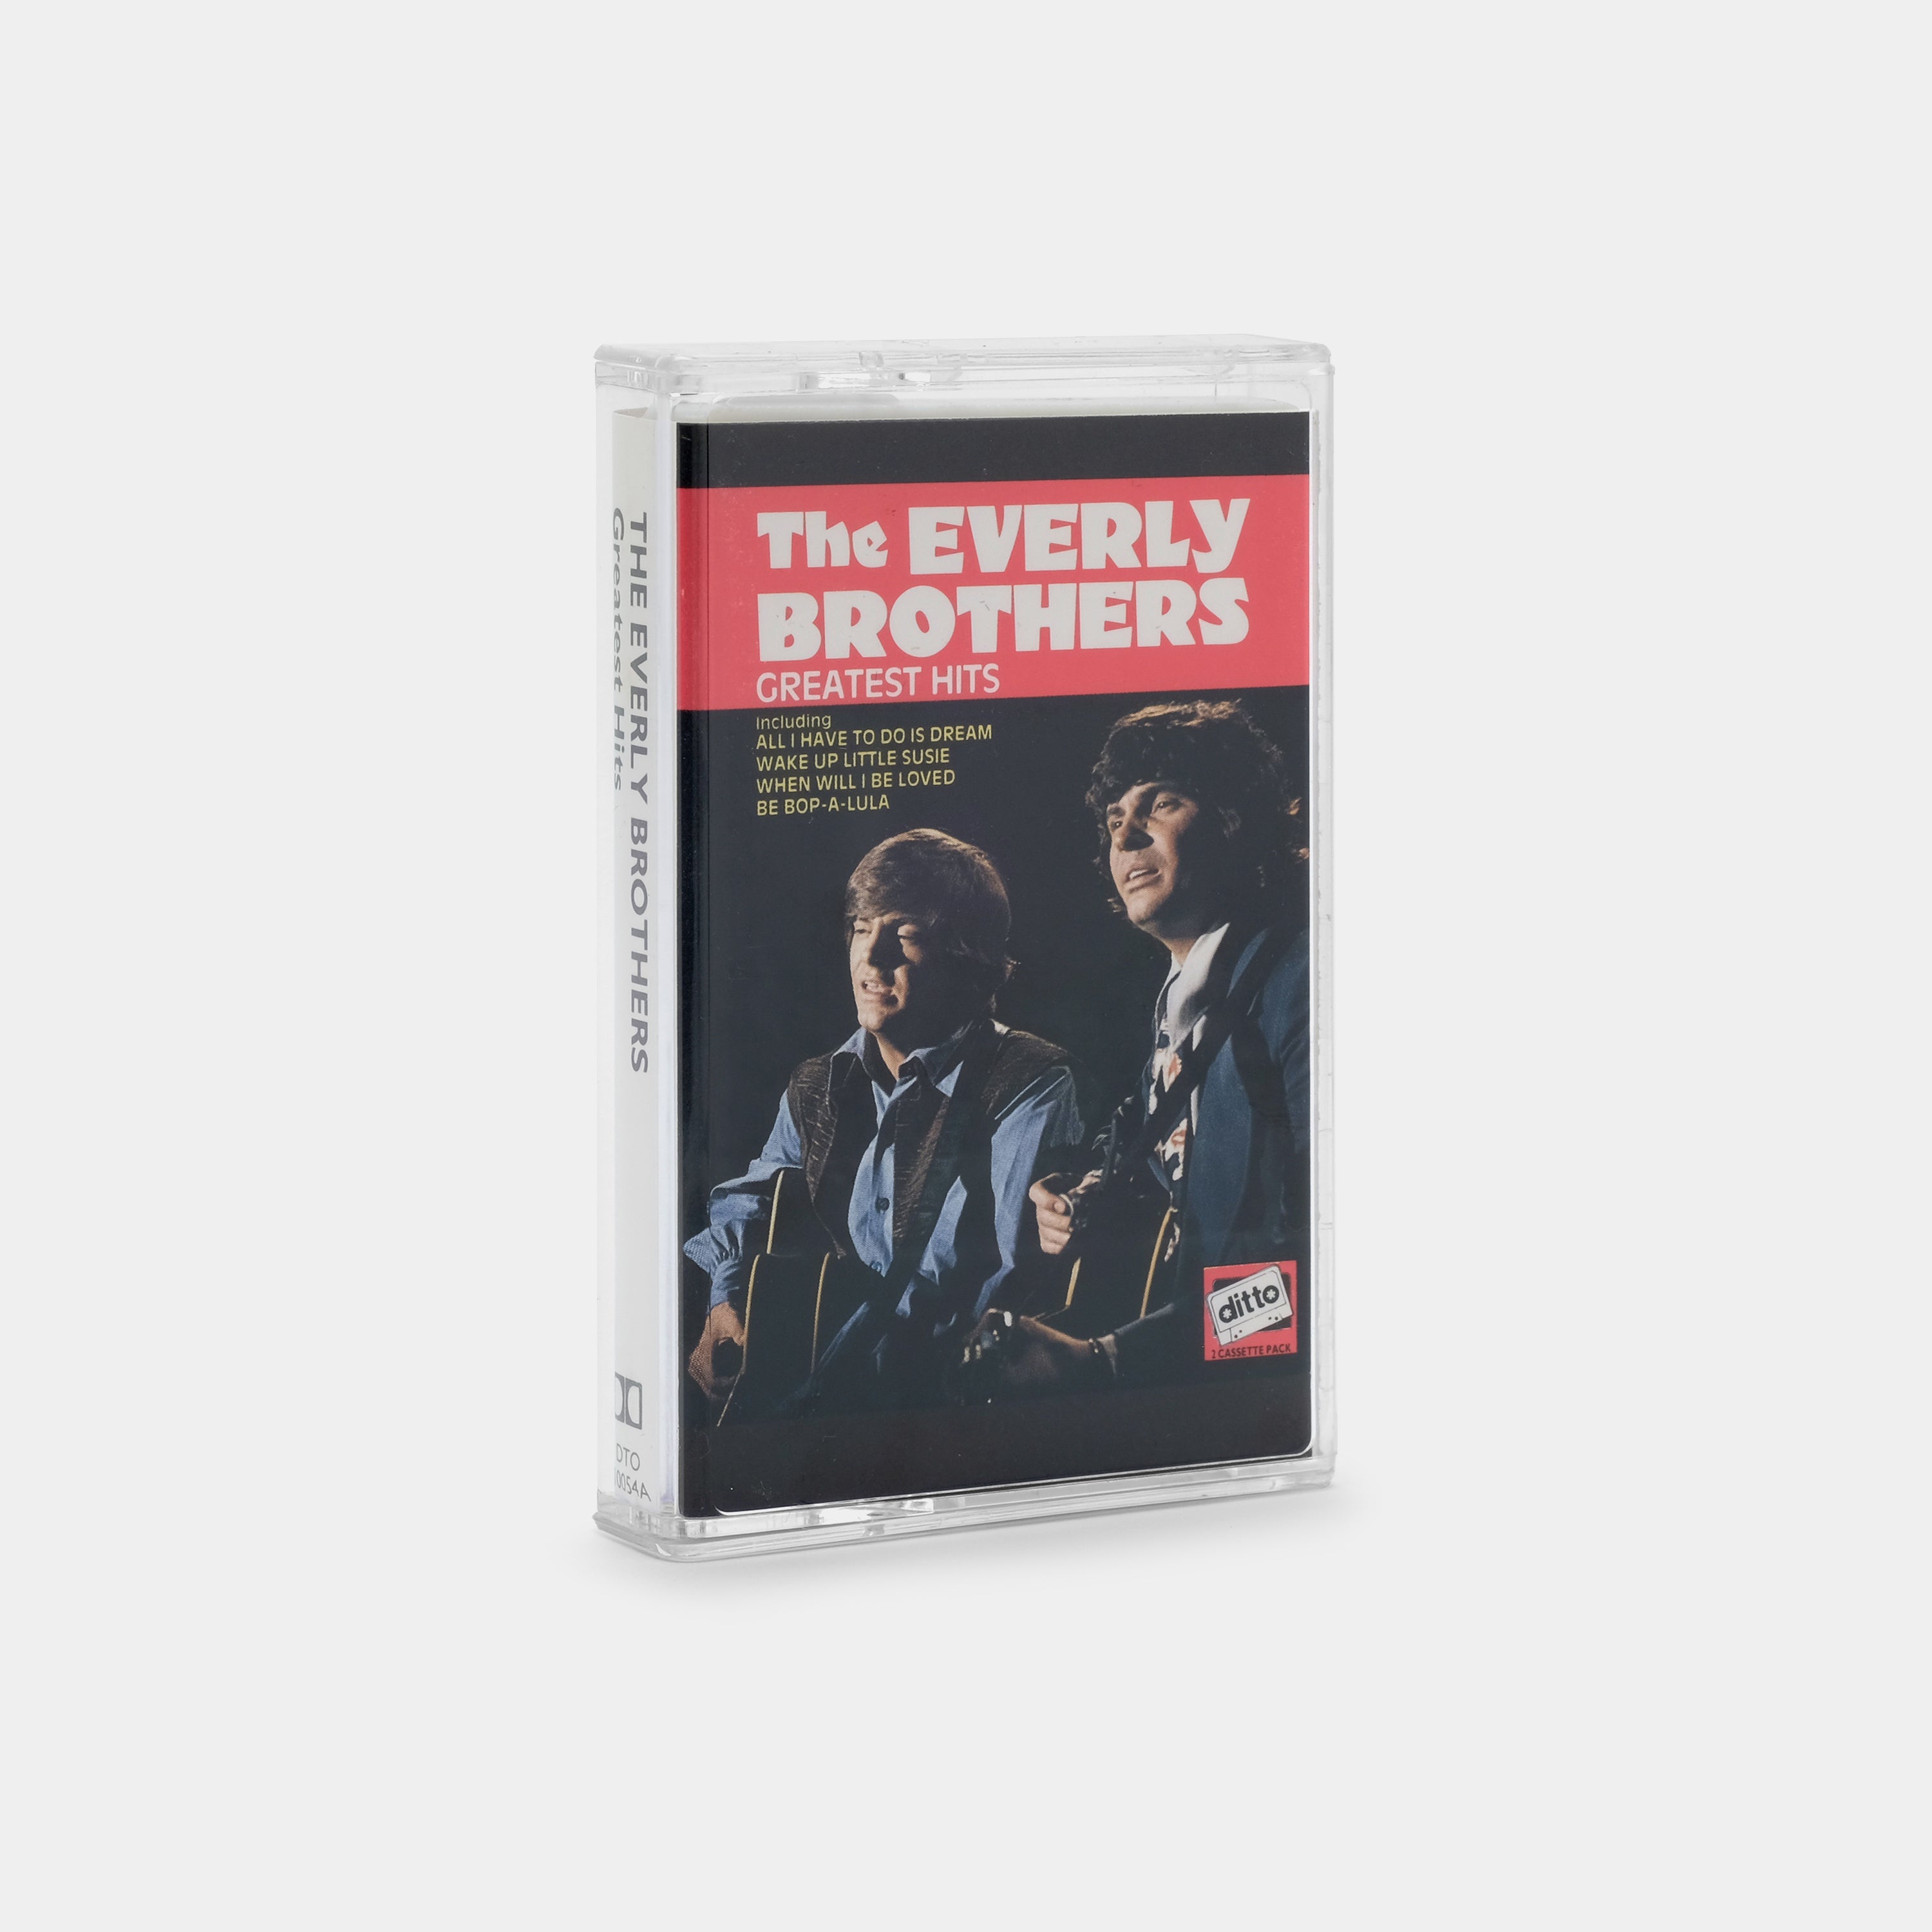 The Everly Brothers - The Everly Brothers Greatest Hits Cassette Tape